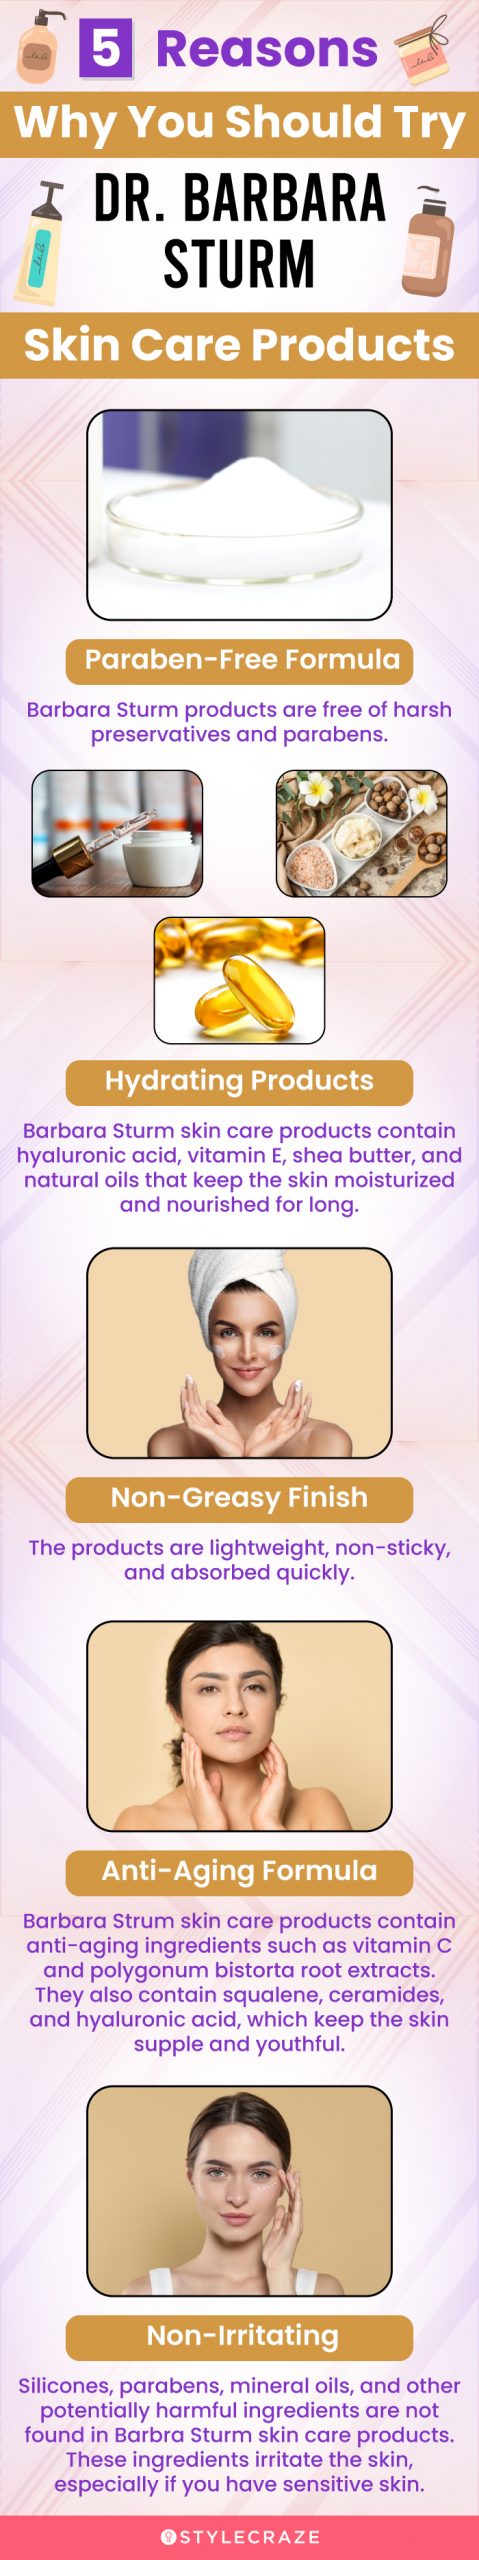 5 Reasons Why You Should Try Dr. Barbara Sturm Skin Care Products (infographic)